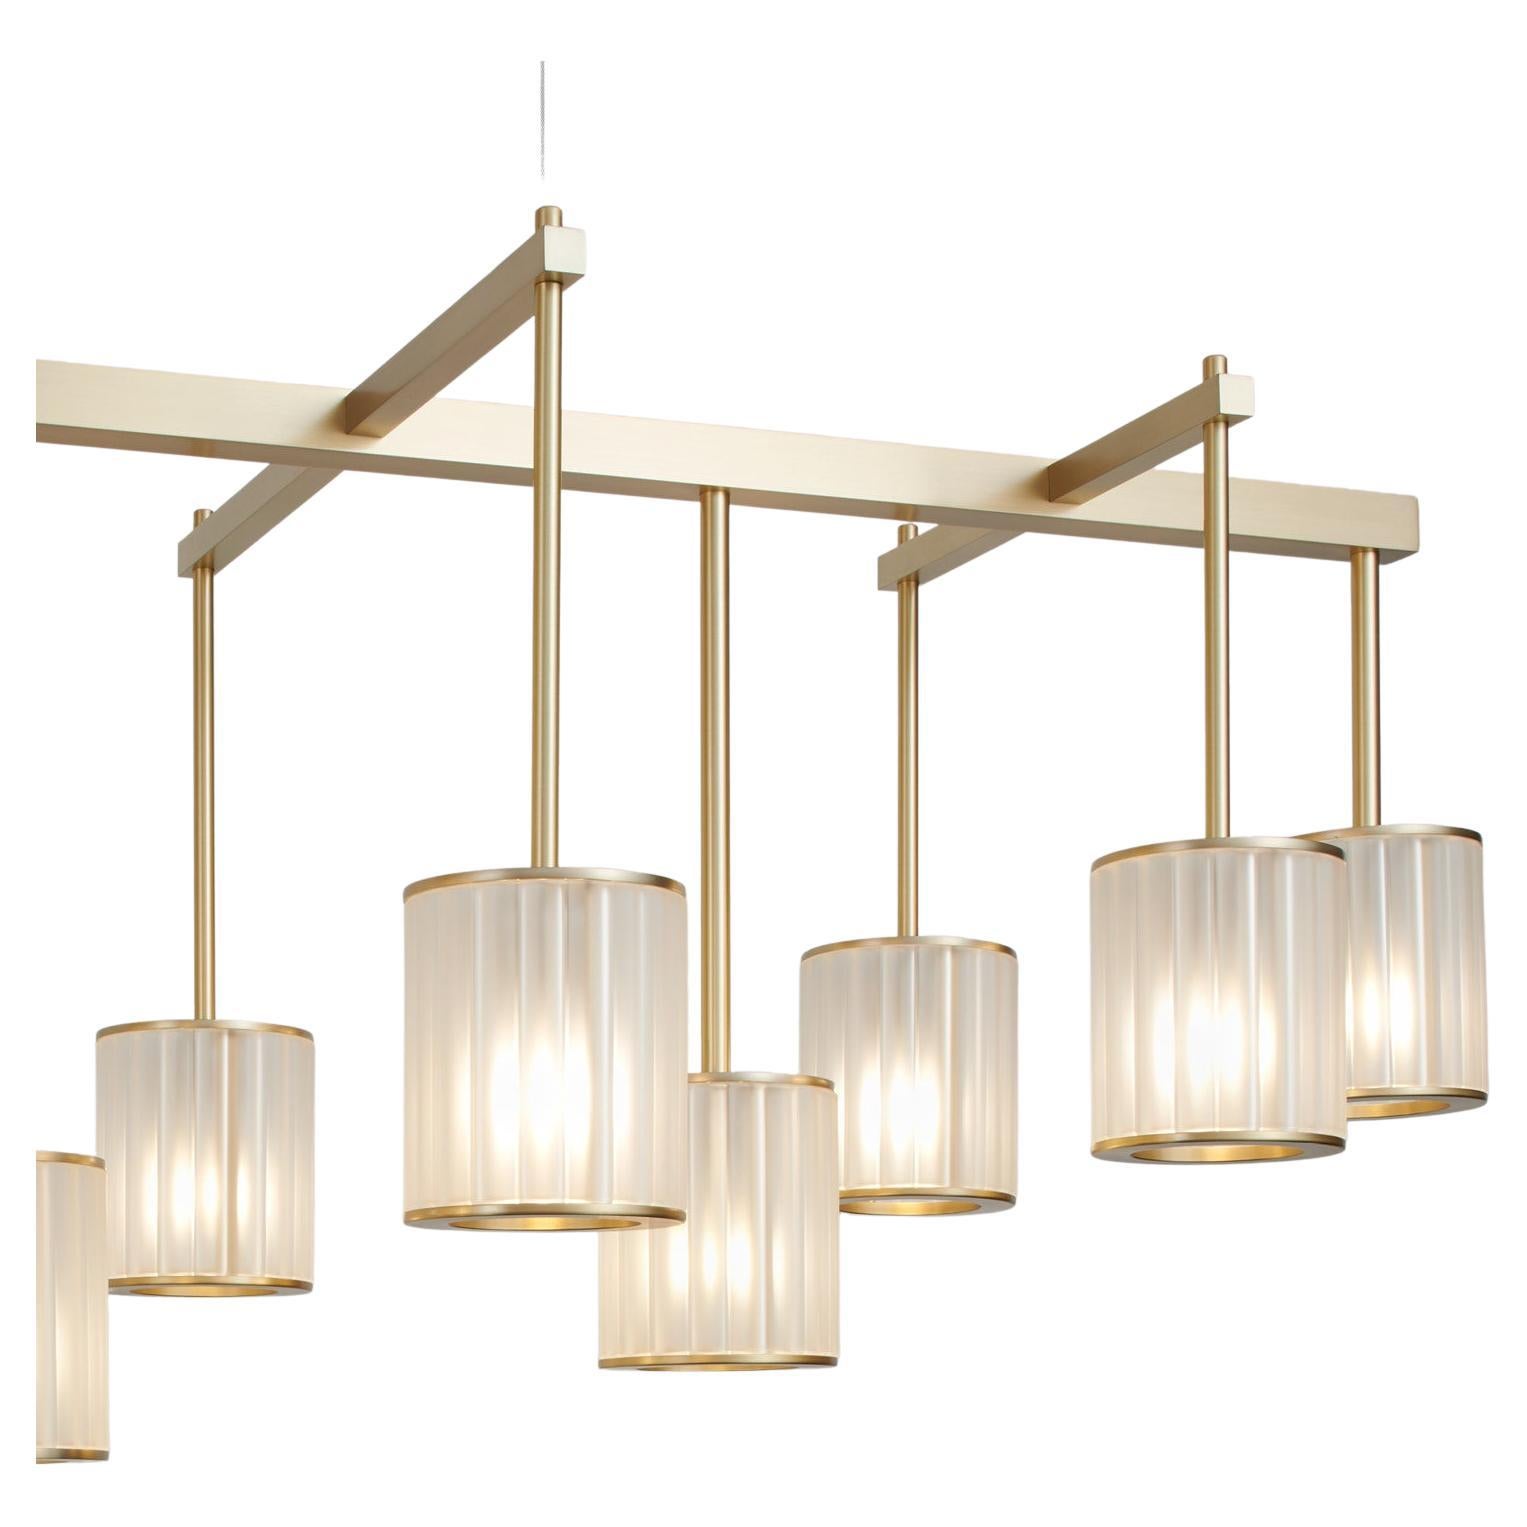 The largest member of the Flute family, the Flute Beam Chandelier is available in two standard sizes and is perfectly suited to formal dining areas and living spaces. The choice of a rich, brushed-brass finish or powder coated RAL colours, combine